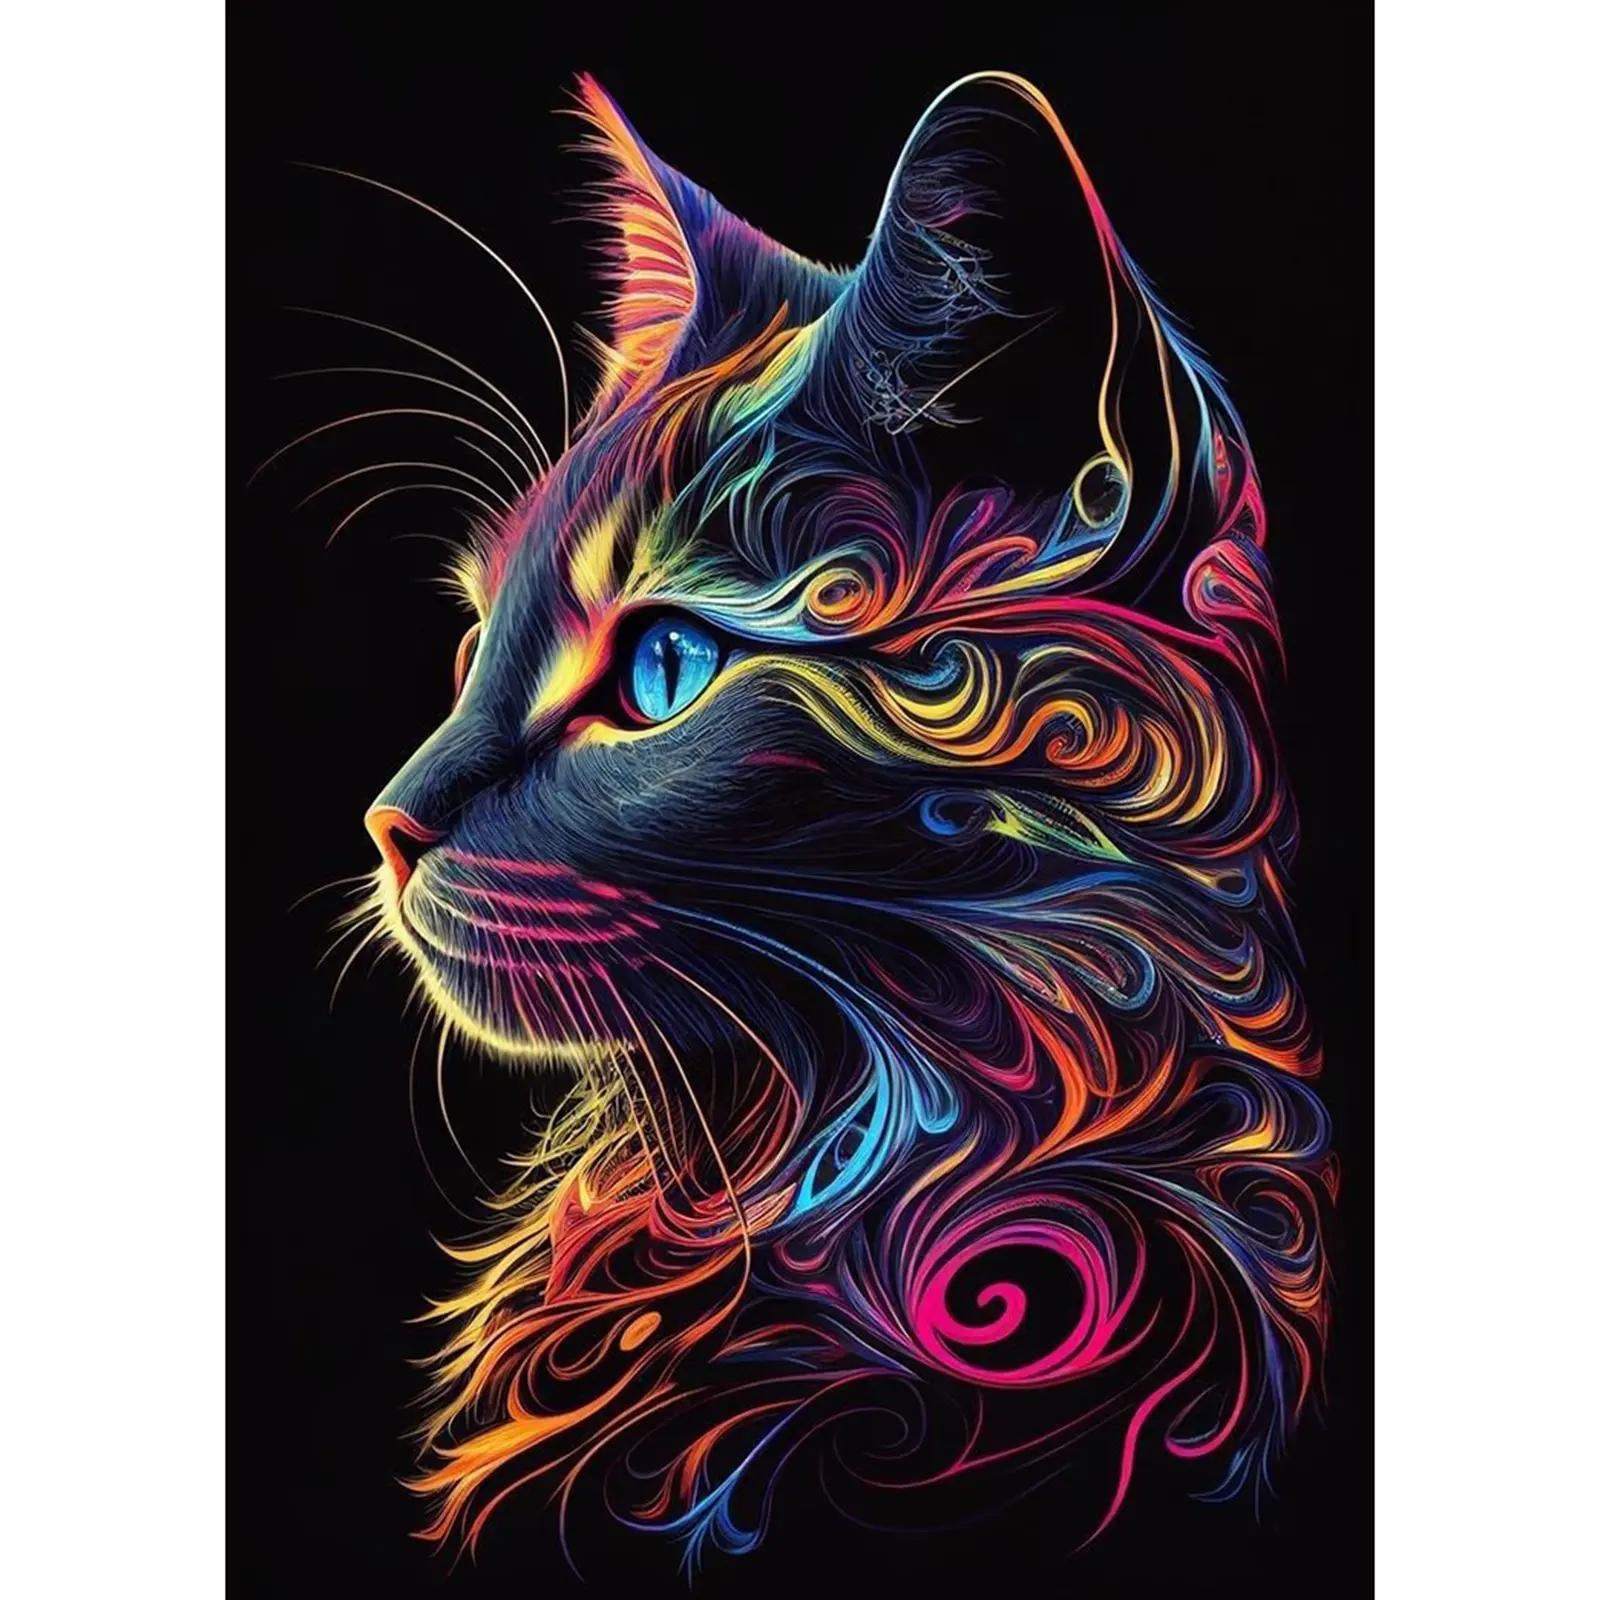 SANJEE DIY Colorful cat in black Full Round Shiny 5D Diamond Art Painting Kits for Adults Children 11.8 x15.7inch